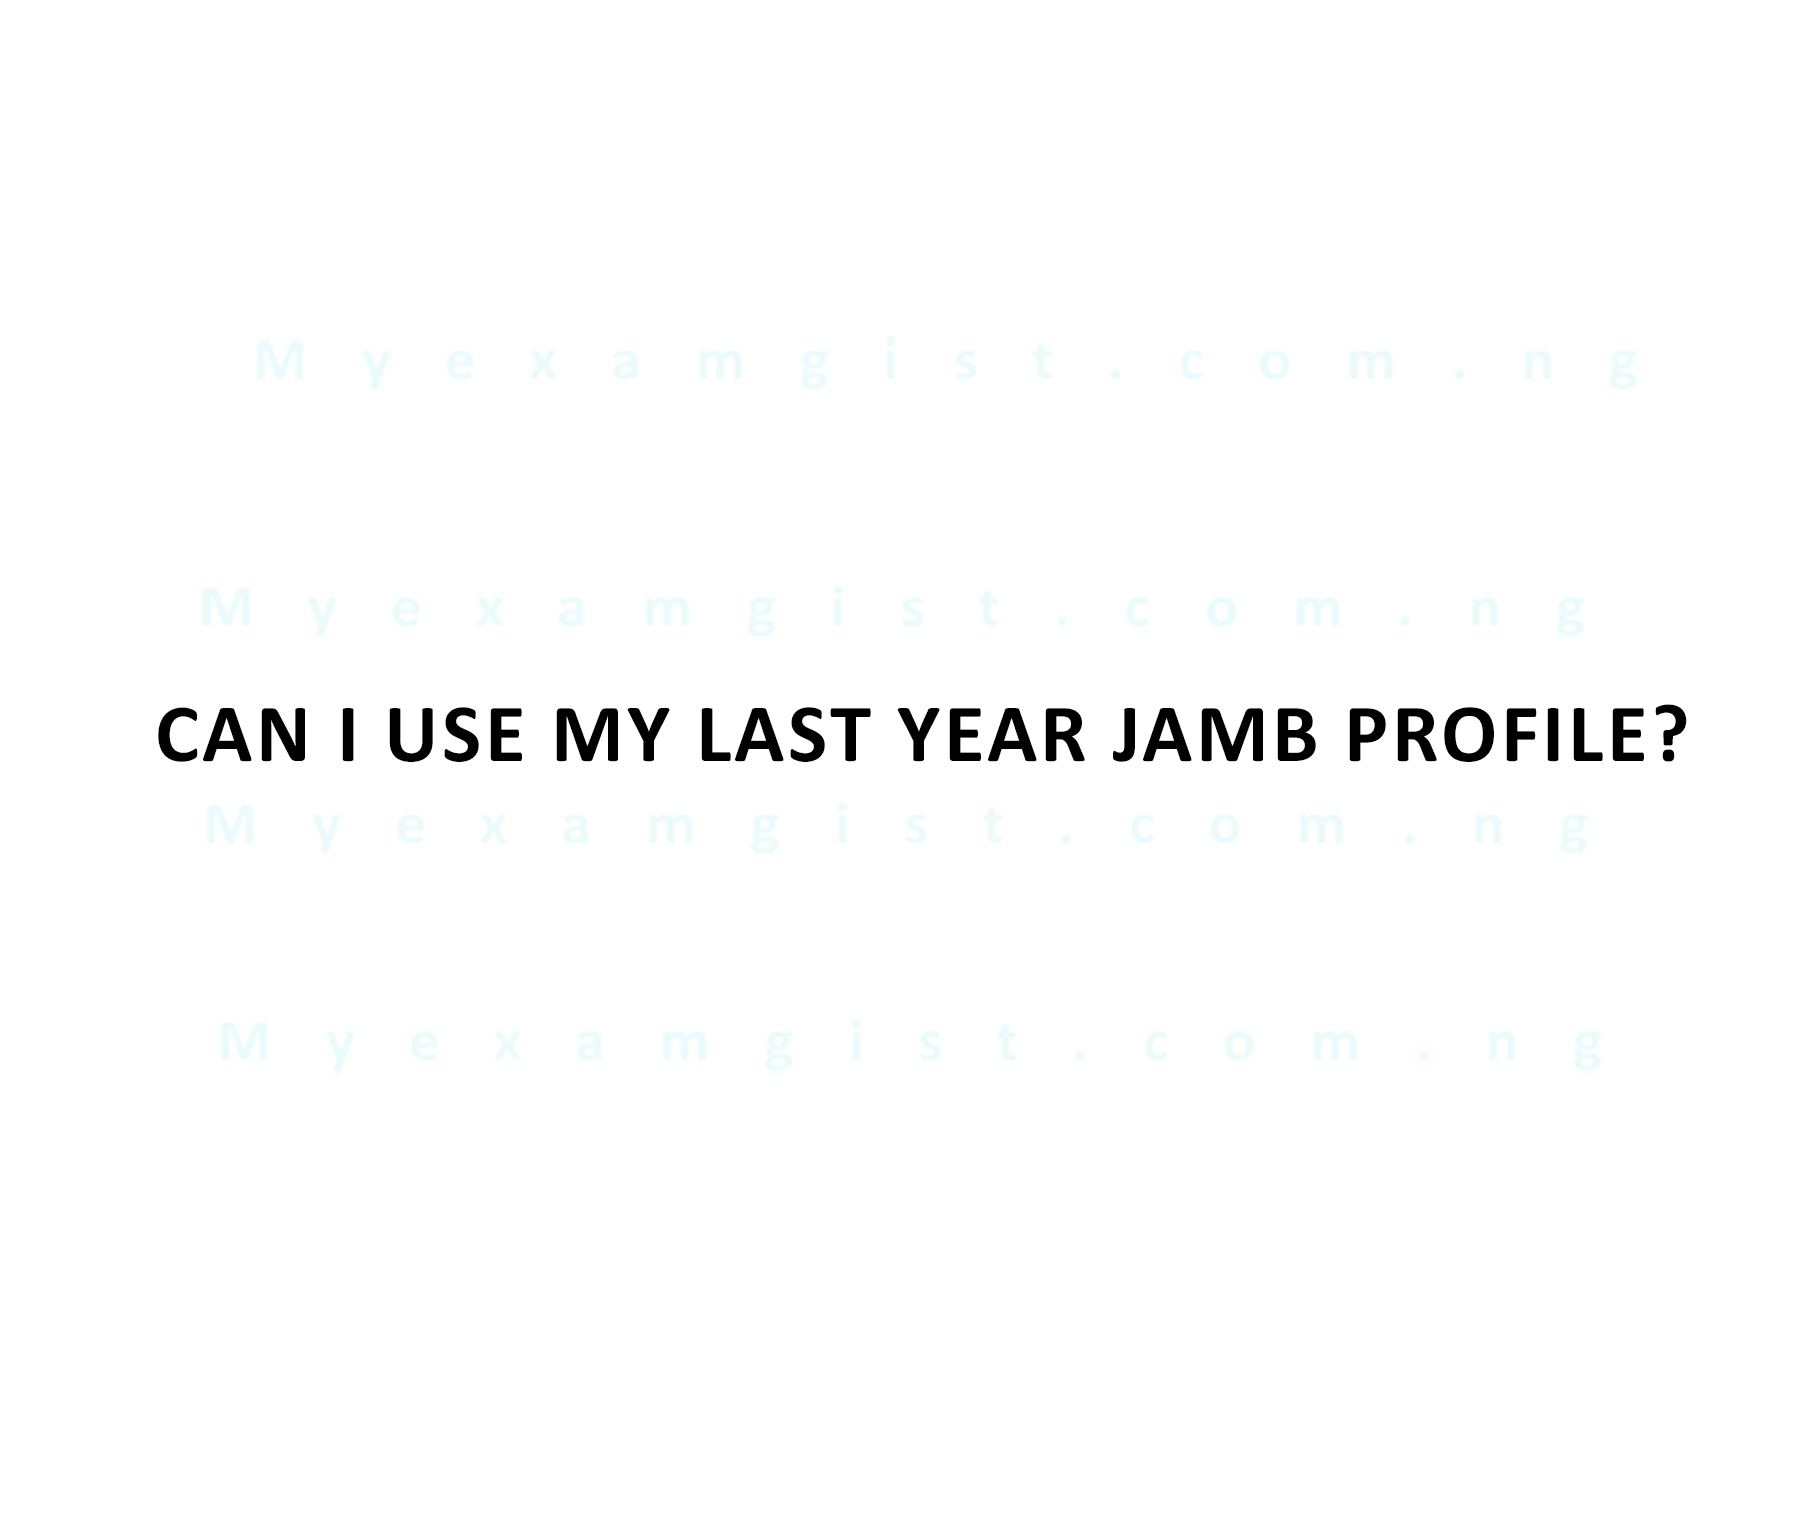 Can I use my last year JAMB profile?